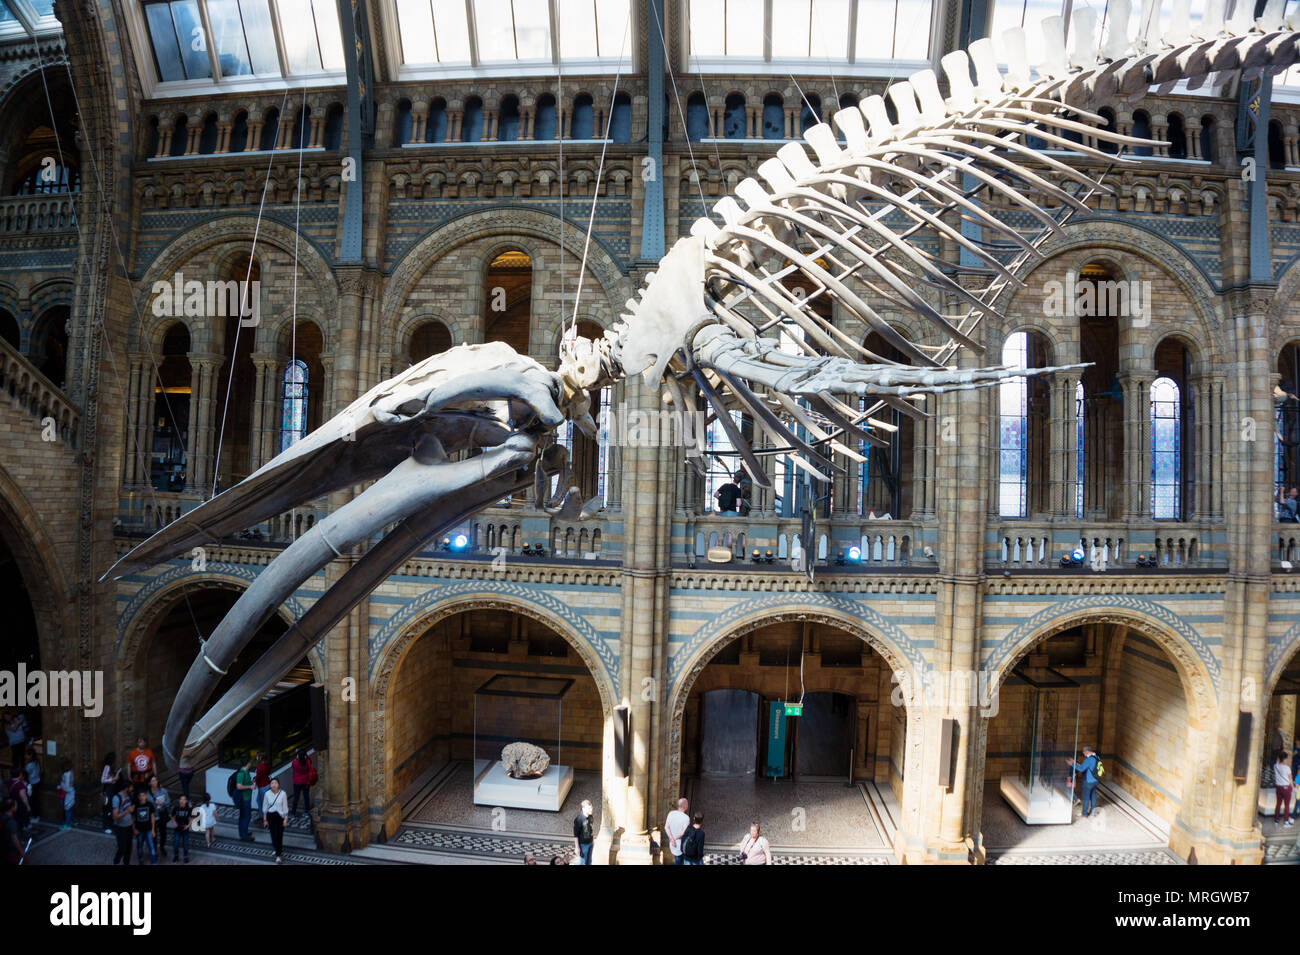 Blue whale skeleton in the Grand Hall of Natural History Museum, London England Stock Photo